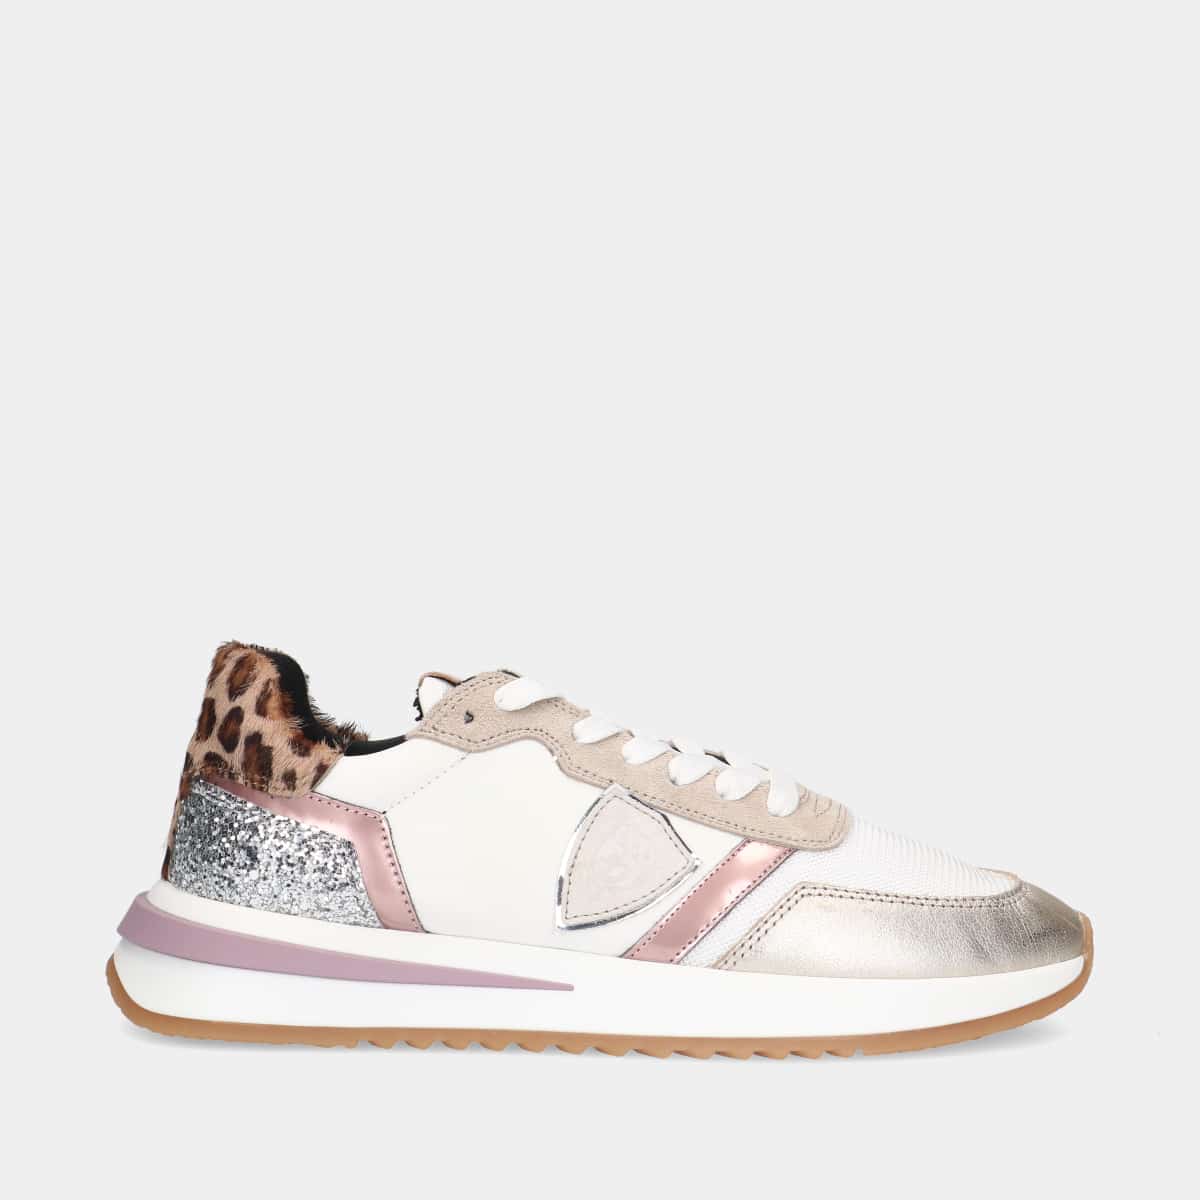 Philippe Model Tropez 2.1 White/Pink dames sneakers